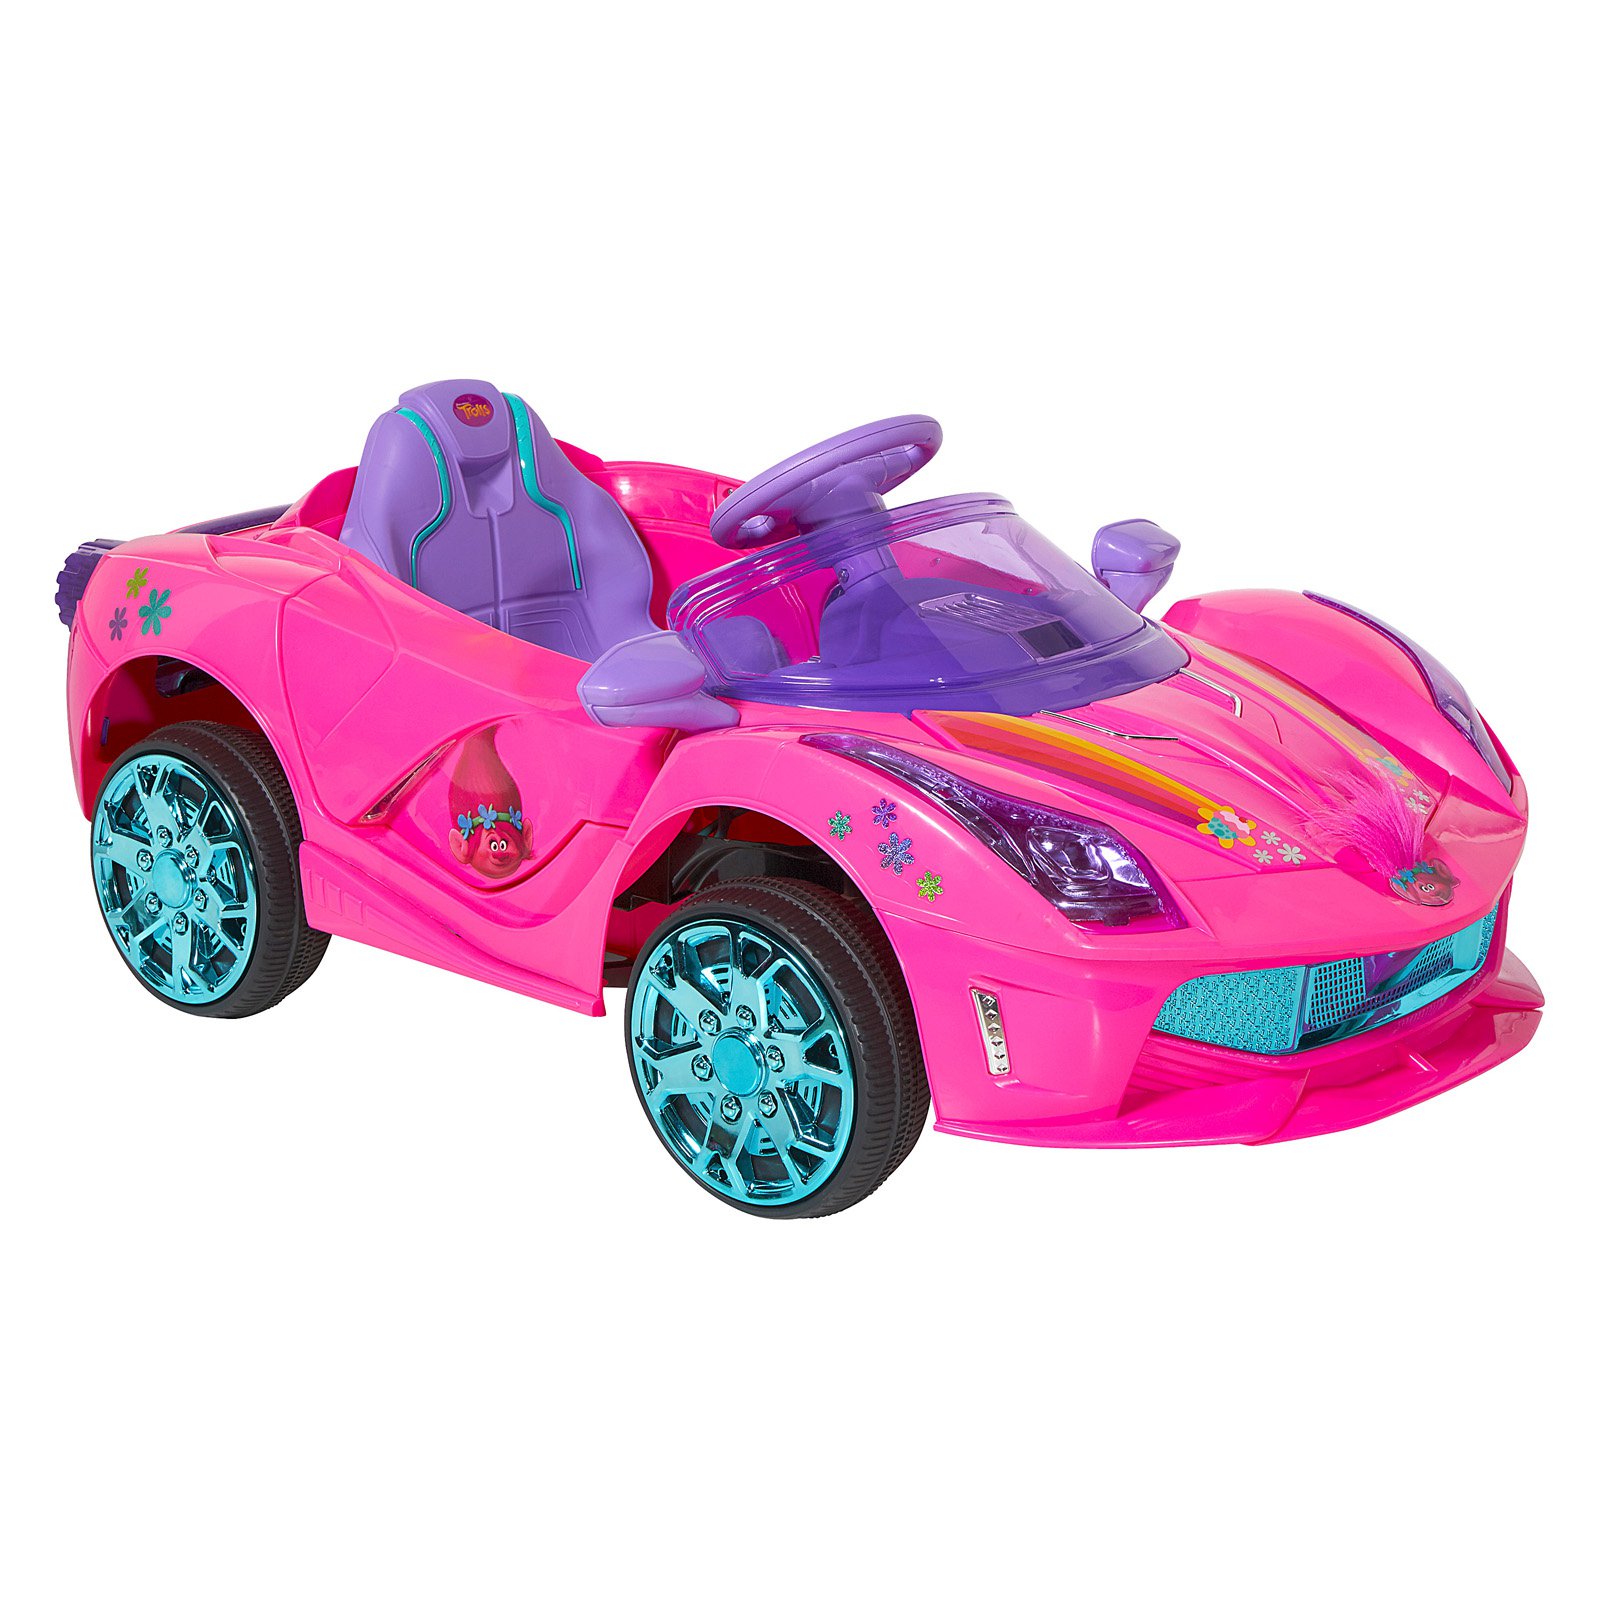 Dynacraft Trolls 6V Super Coupe Ride-On for Kids by Dynacraft - image 1 of 4